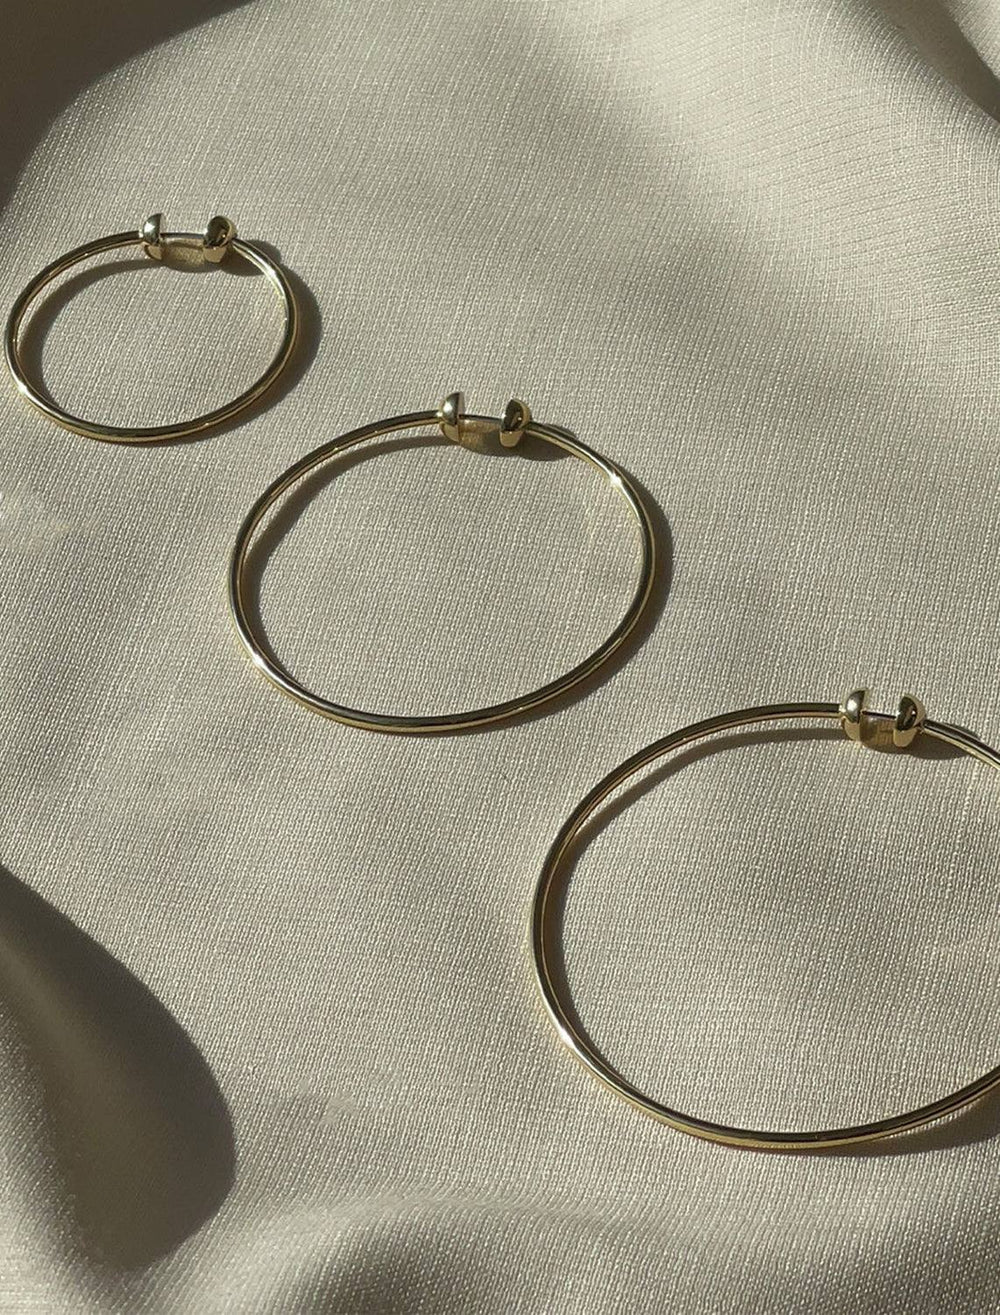 Jenny Bird new icon hoops in gold large - Twigs